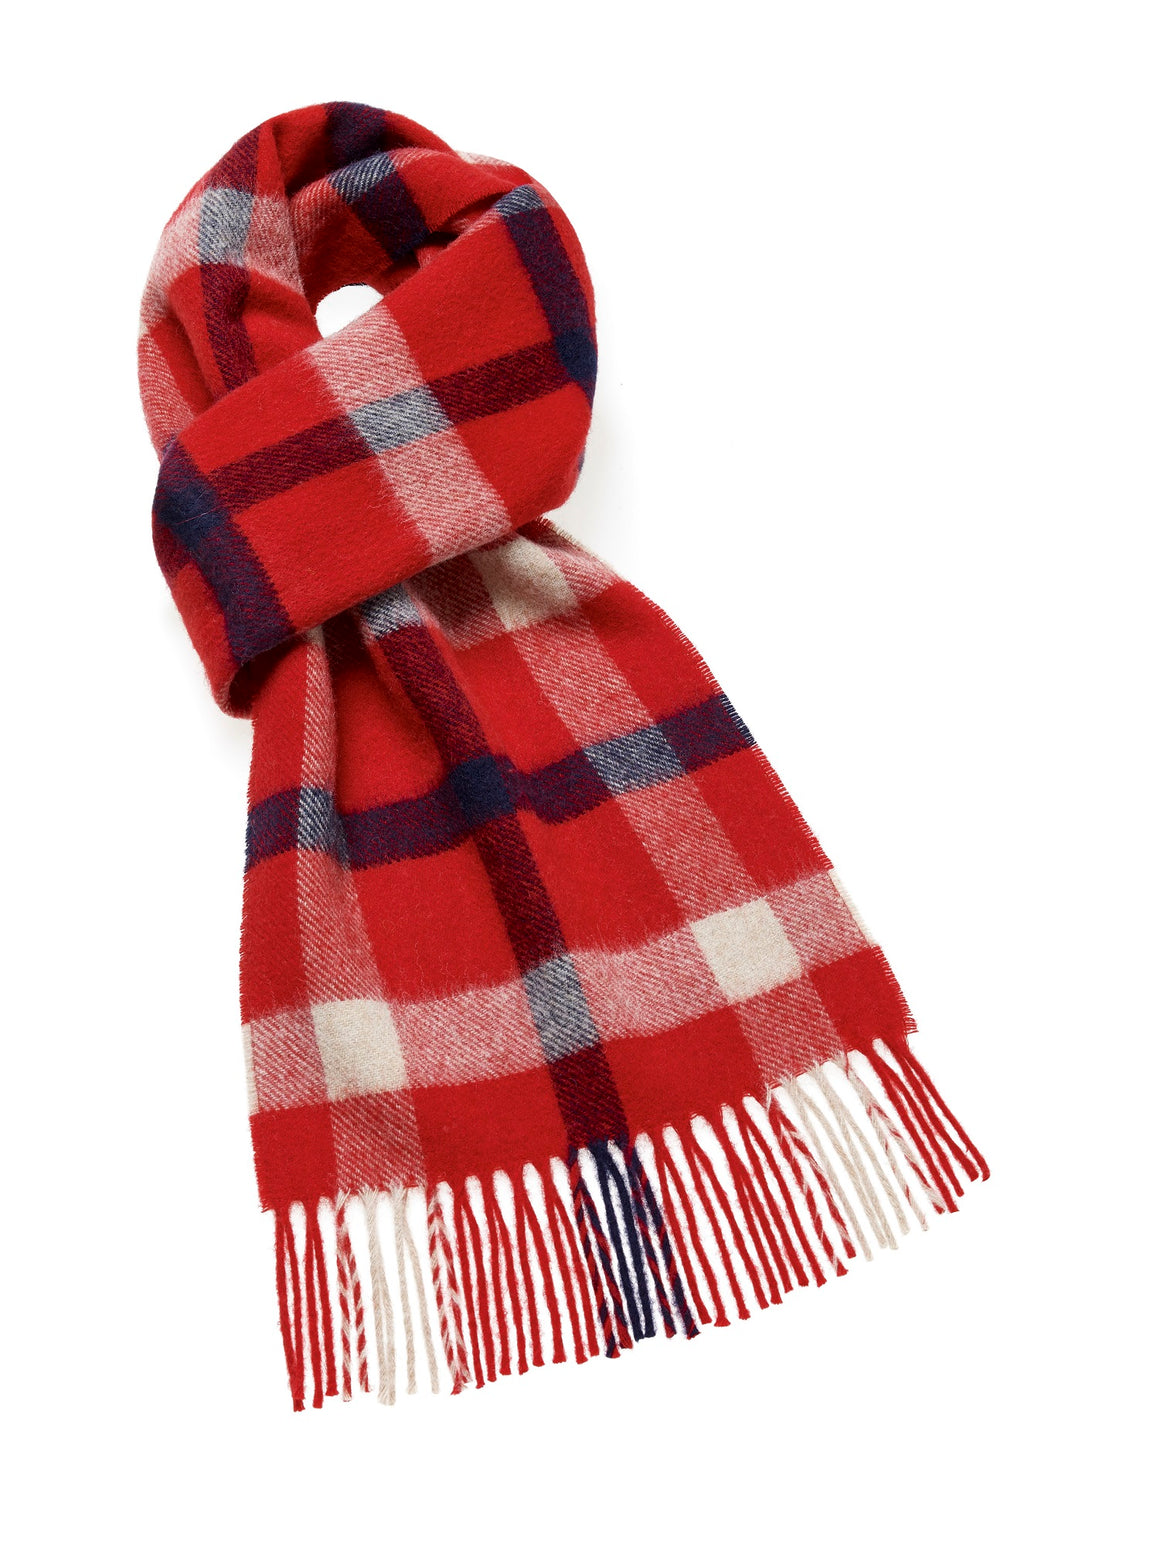 Blyth Red Scarf - Merino Lambswool - Made in England